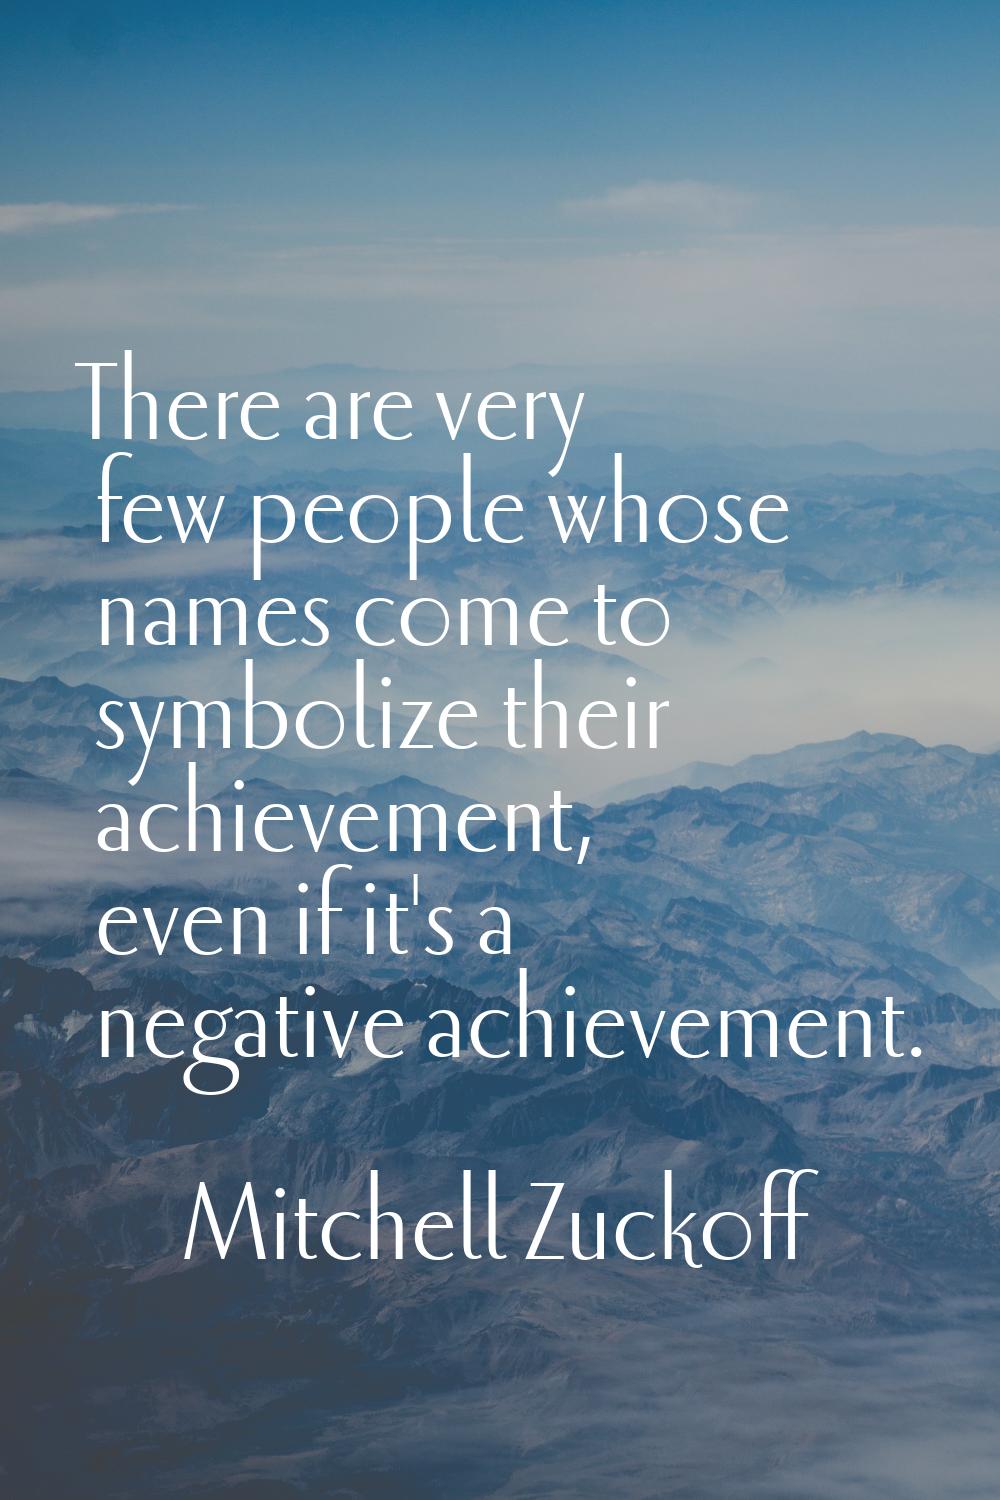 There are very few people whose names come to symbolize their achievement, even if it's a negative 